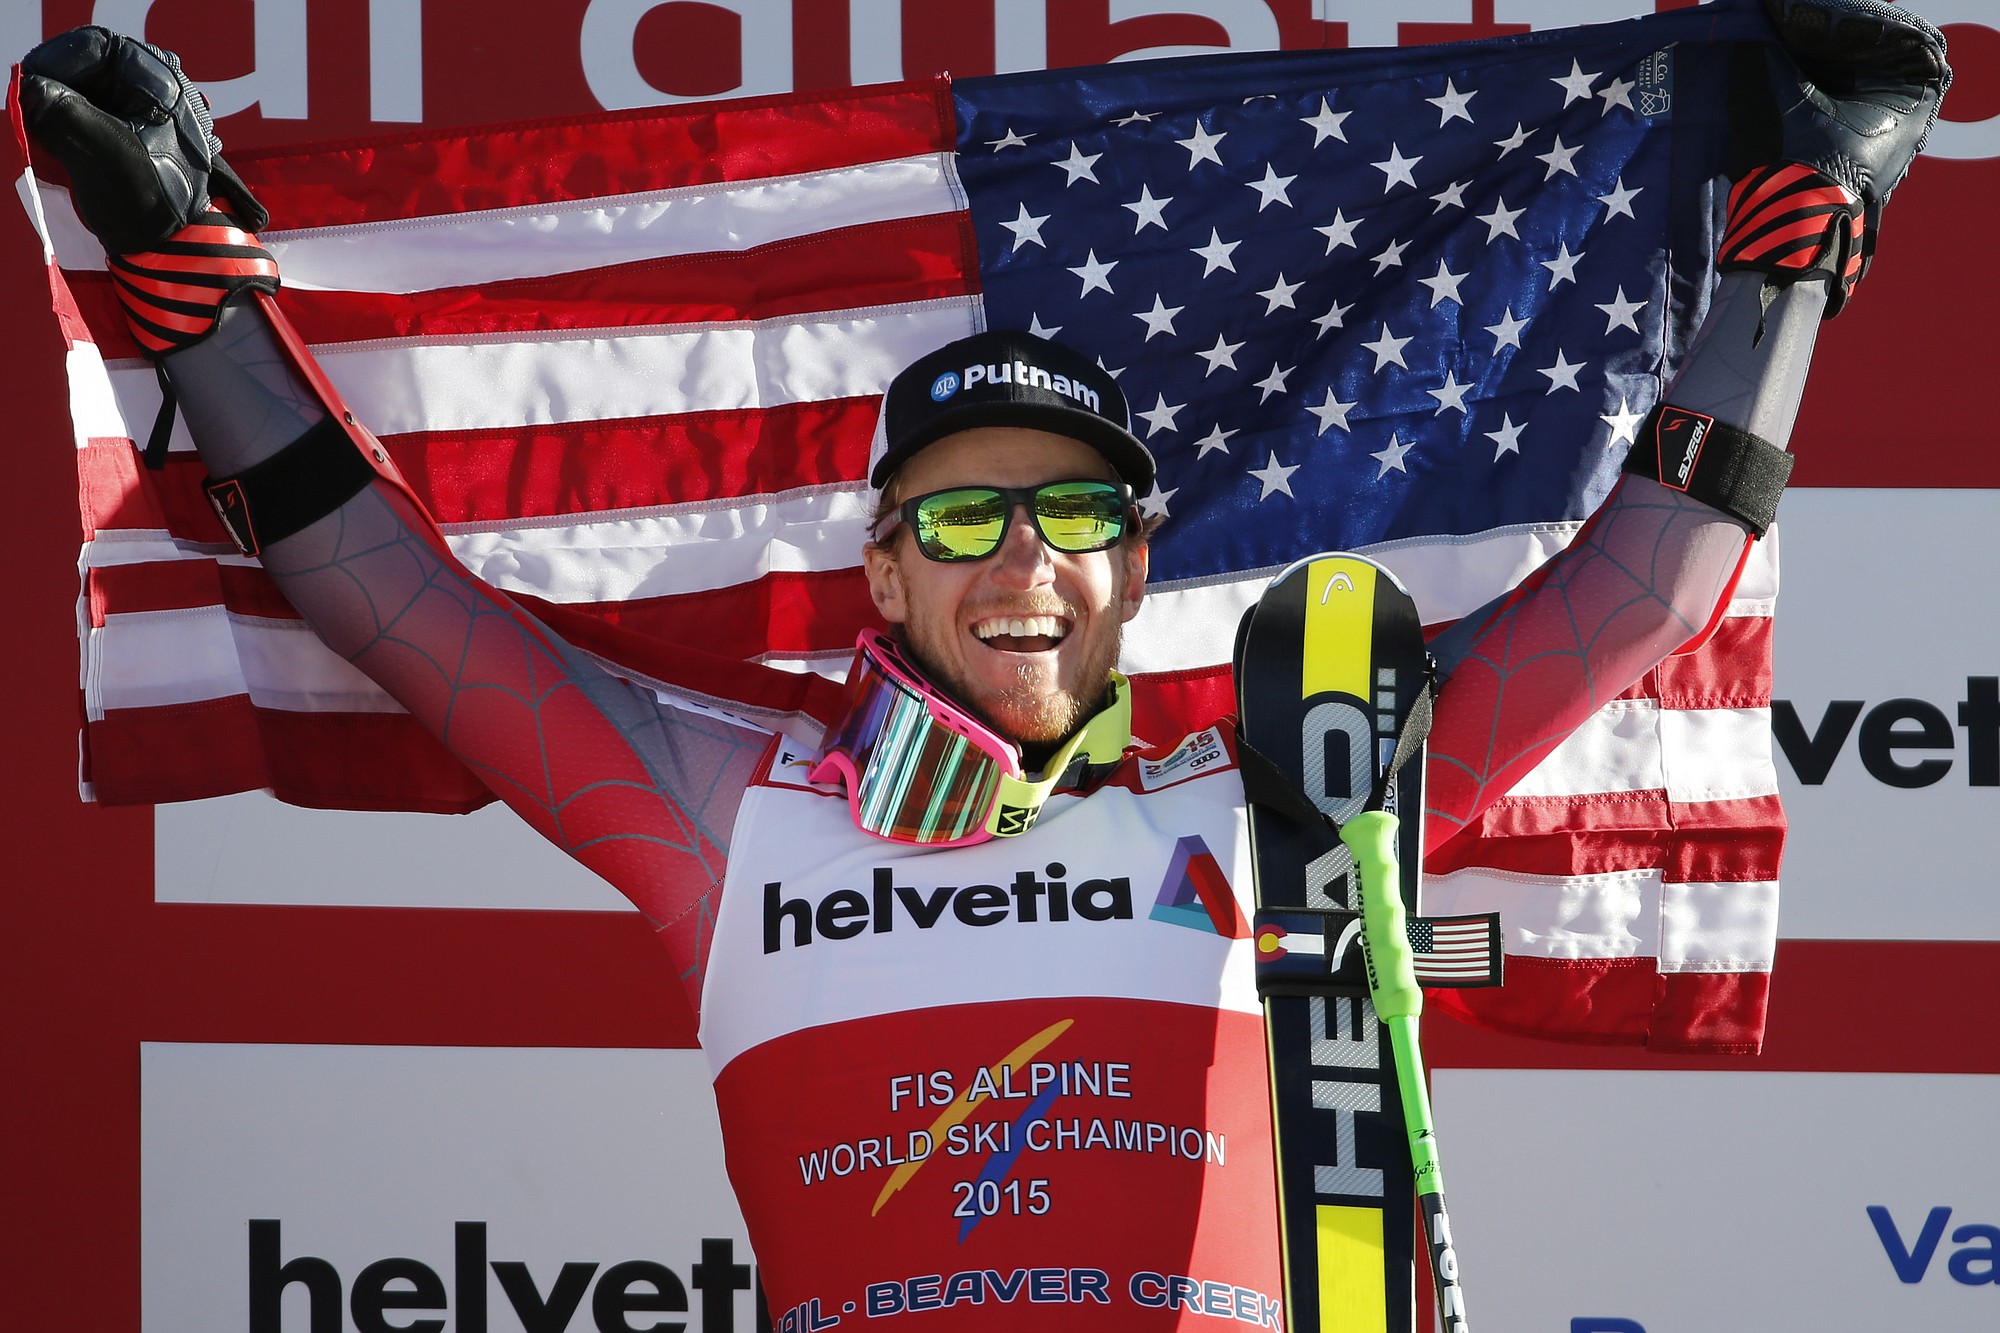 United States' Ted Ligety holds a flag after winning the men's giant slalom at the alpine skiing world championships Friday, Feb. 13, 2015, in Beaver Creek, Colo.